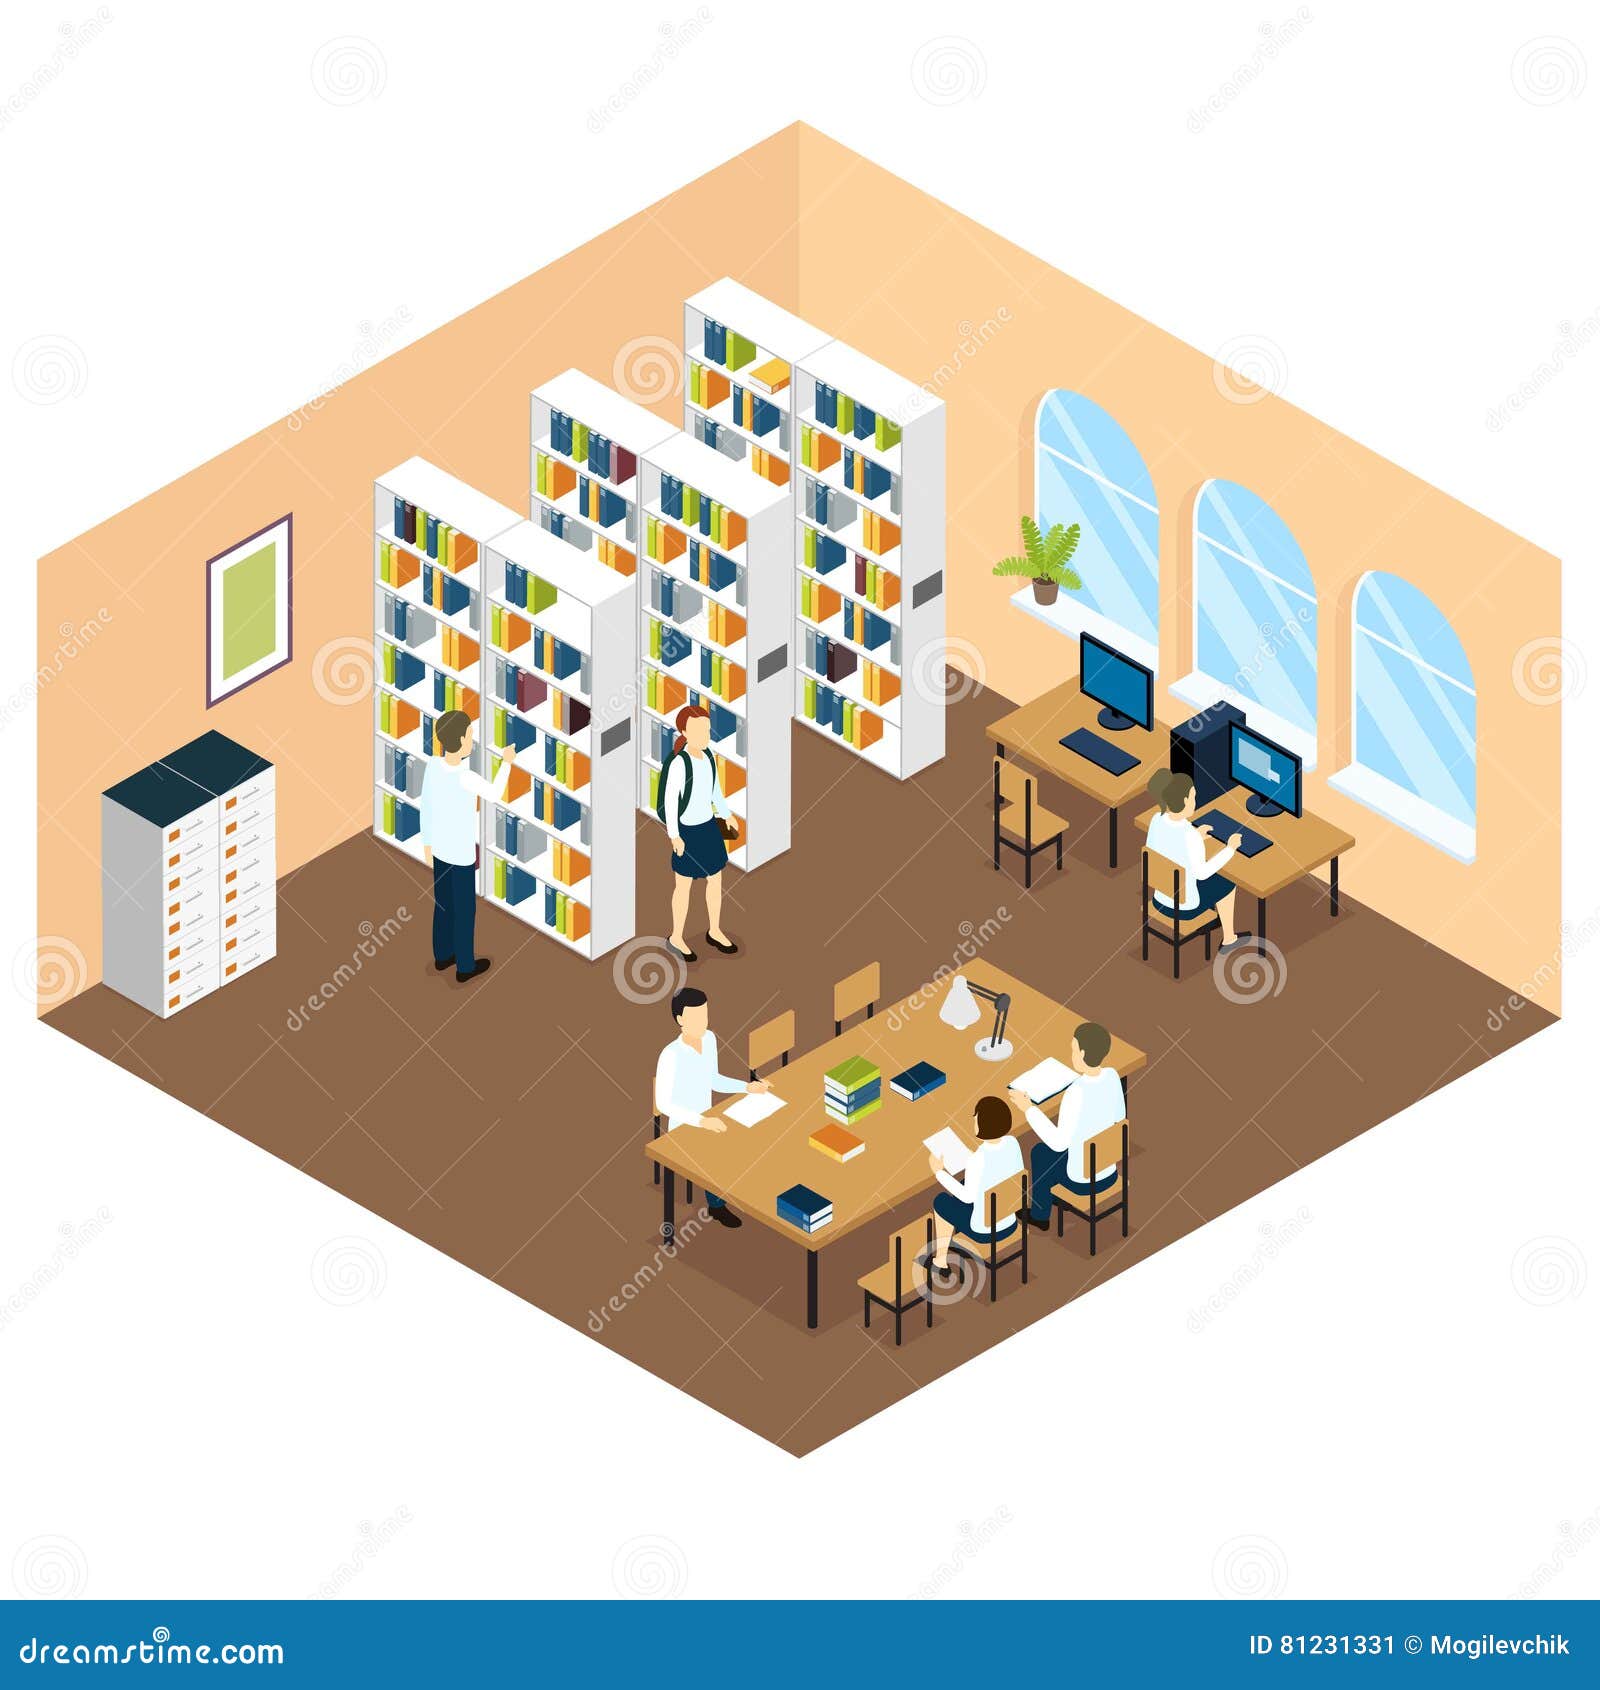 Download Student Library Isometric Design Stock Vector ...